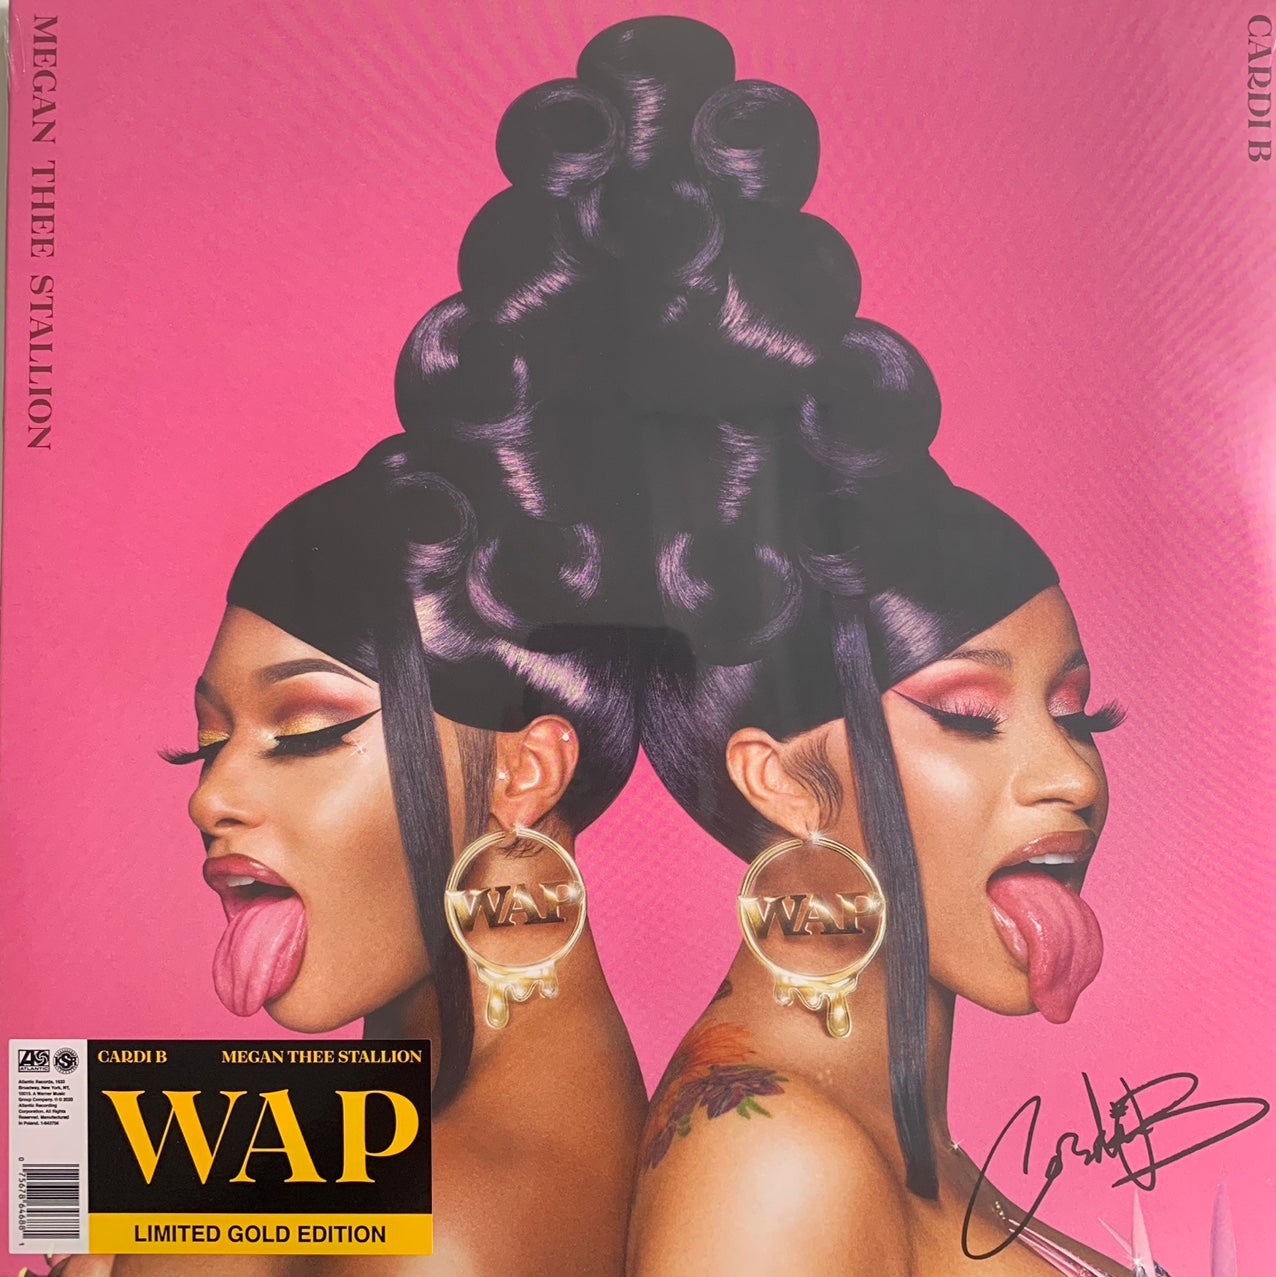 Cardi B & Megan Thee Stallion Signed by Cardi B “WAP” 4 Version limited Edition Gold 12inch Vinyl, Factory Sealed